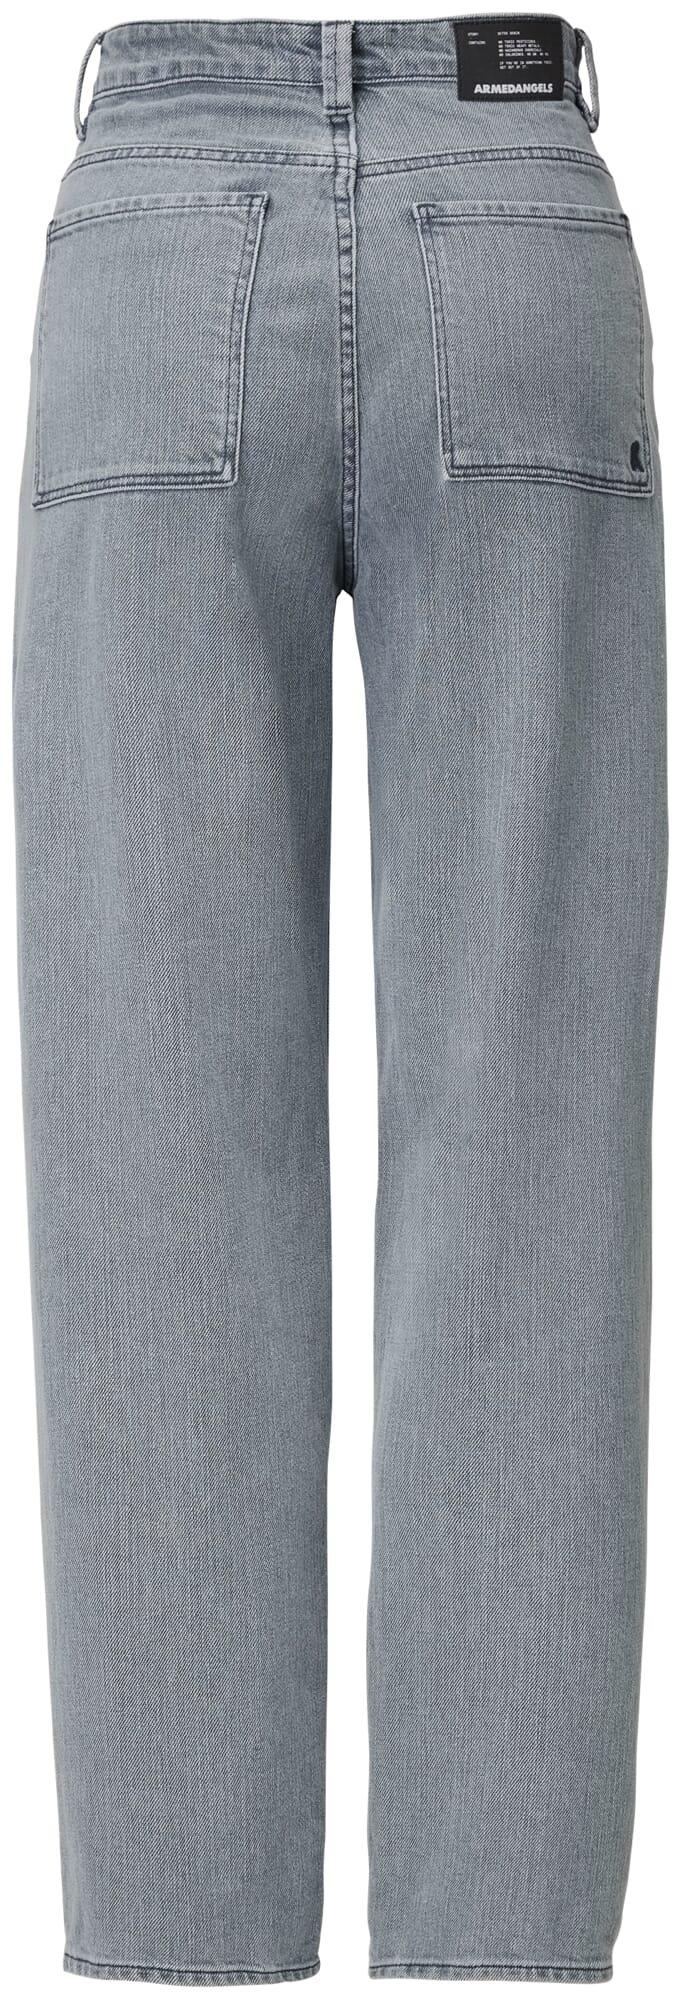 GN.05 Women's Waxed Canvas Fitted Work Pant - Havana